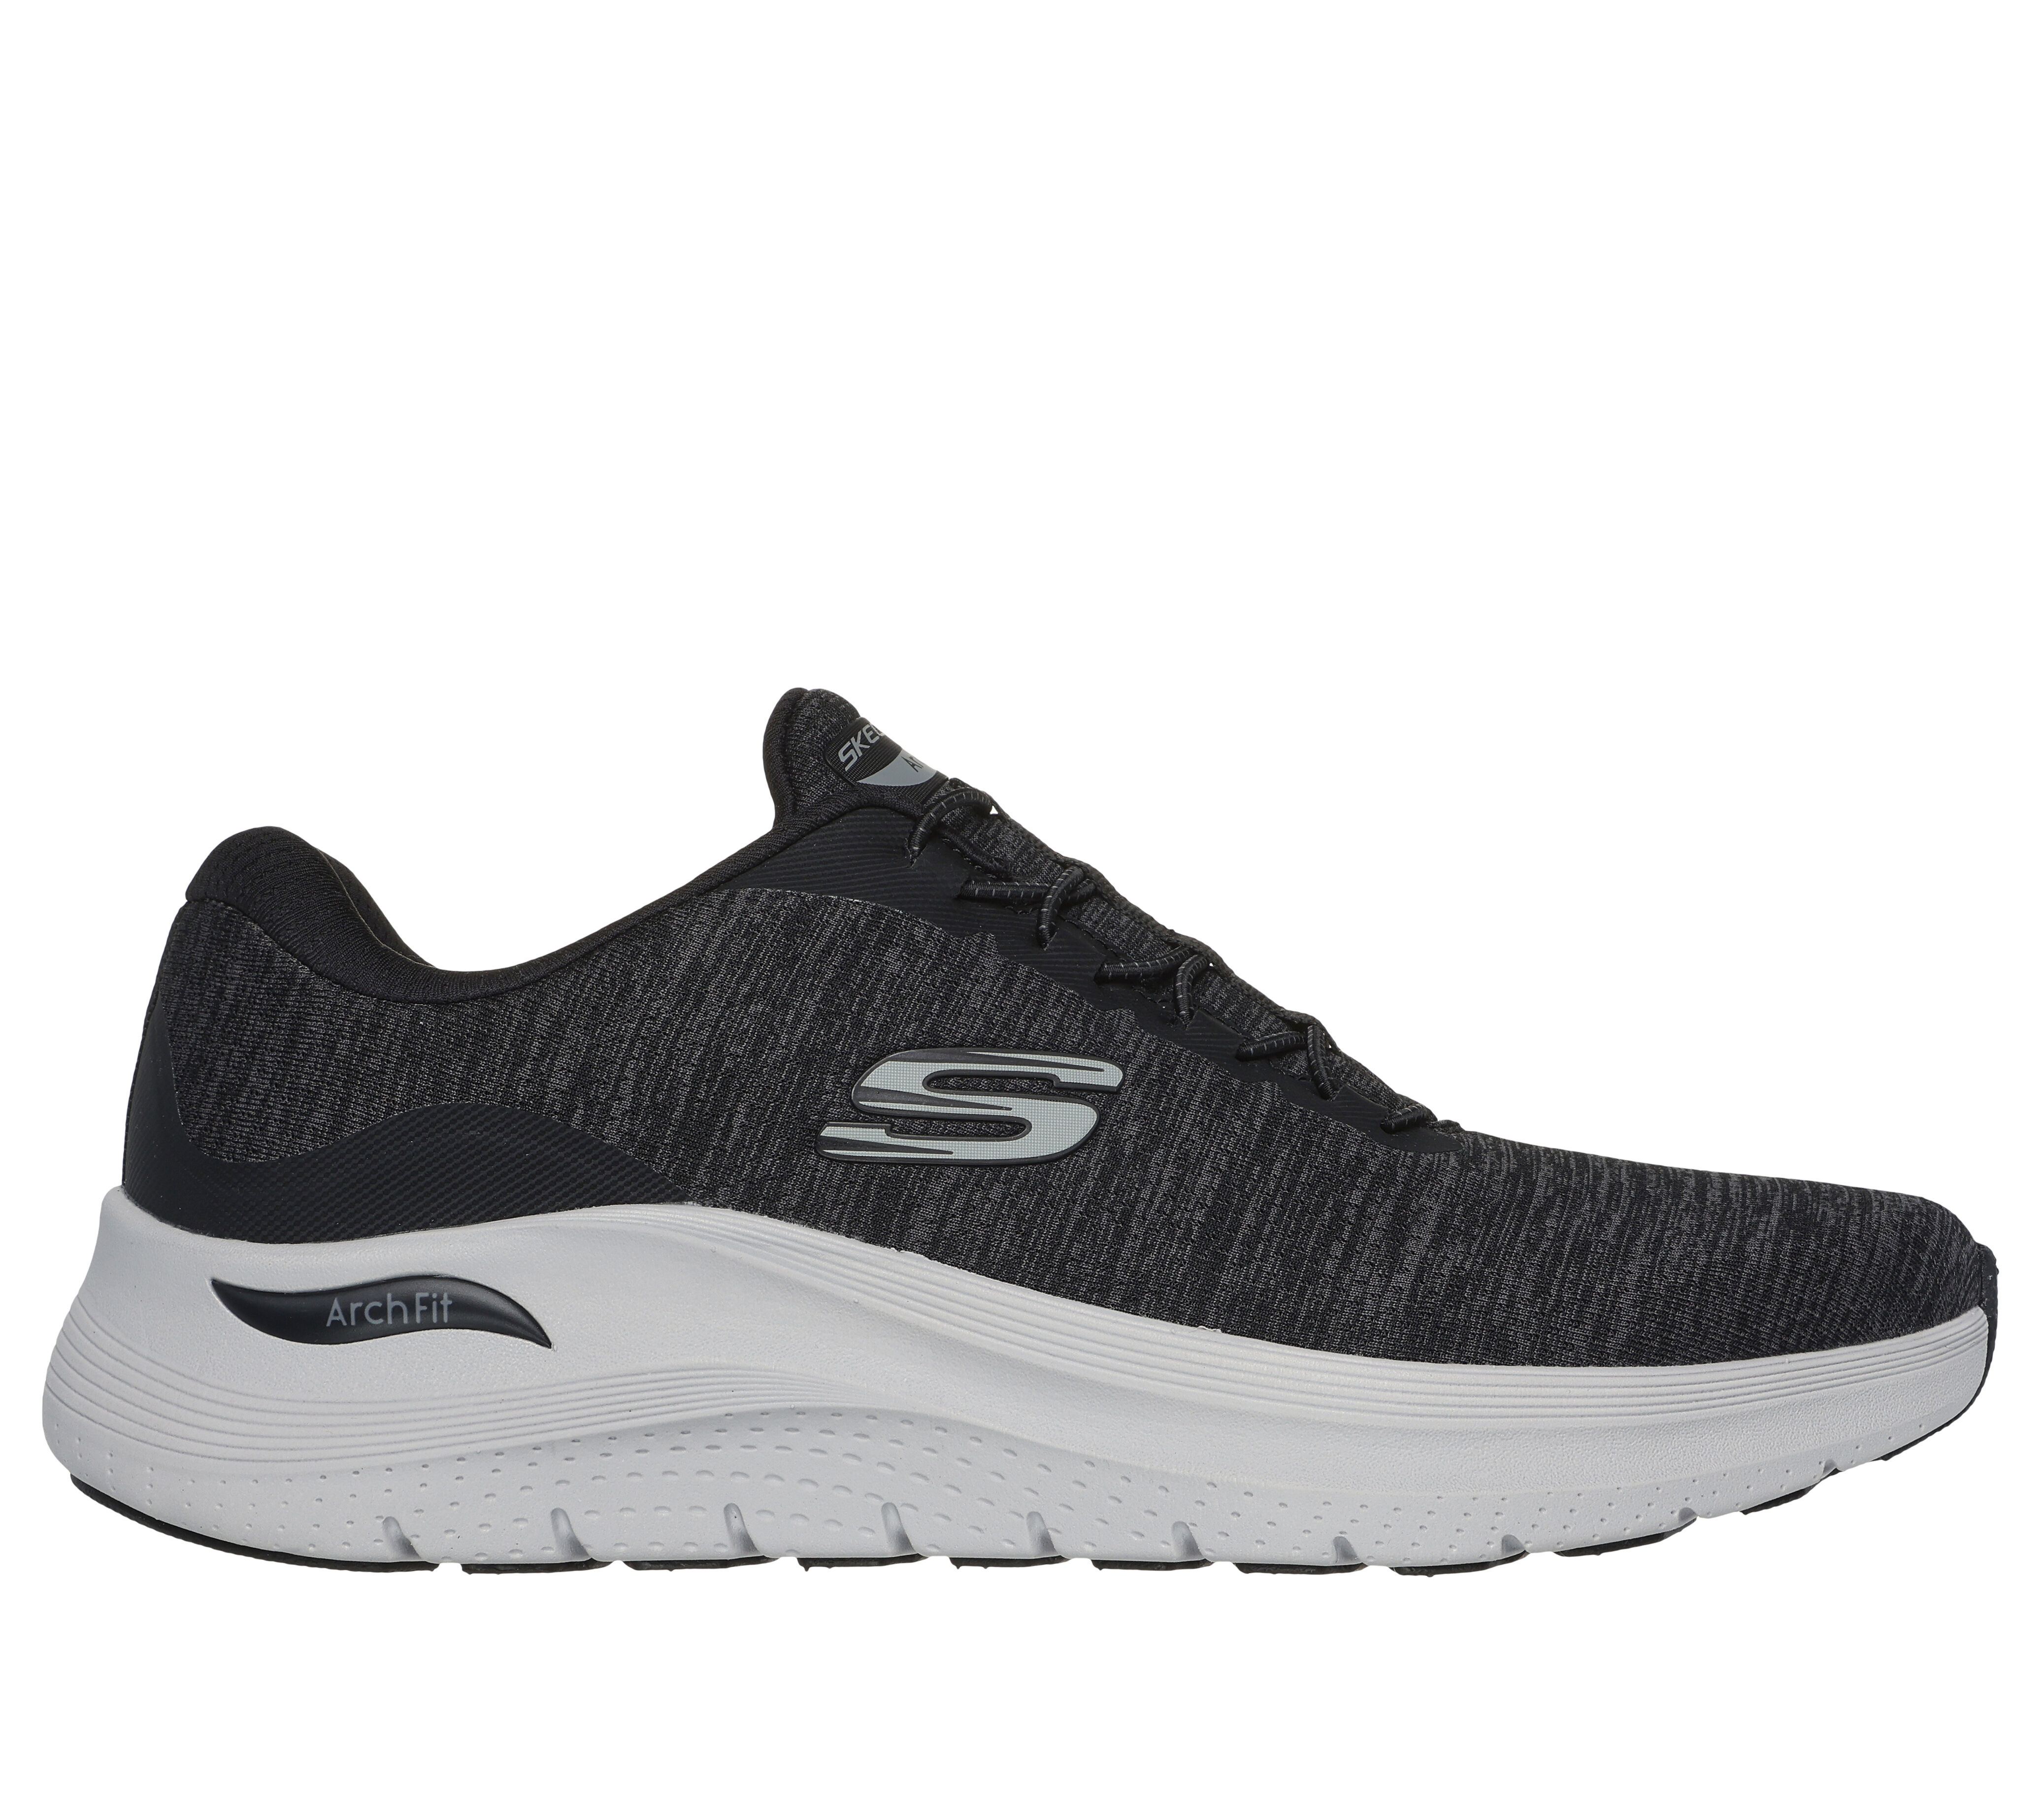 Shop the Arch Fit 2.0 - Upperhand | SKECHERS CA